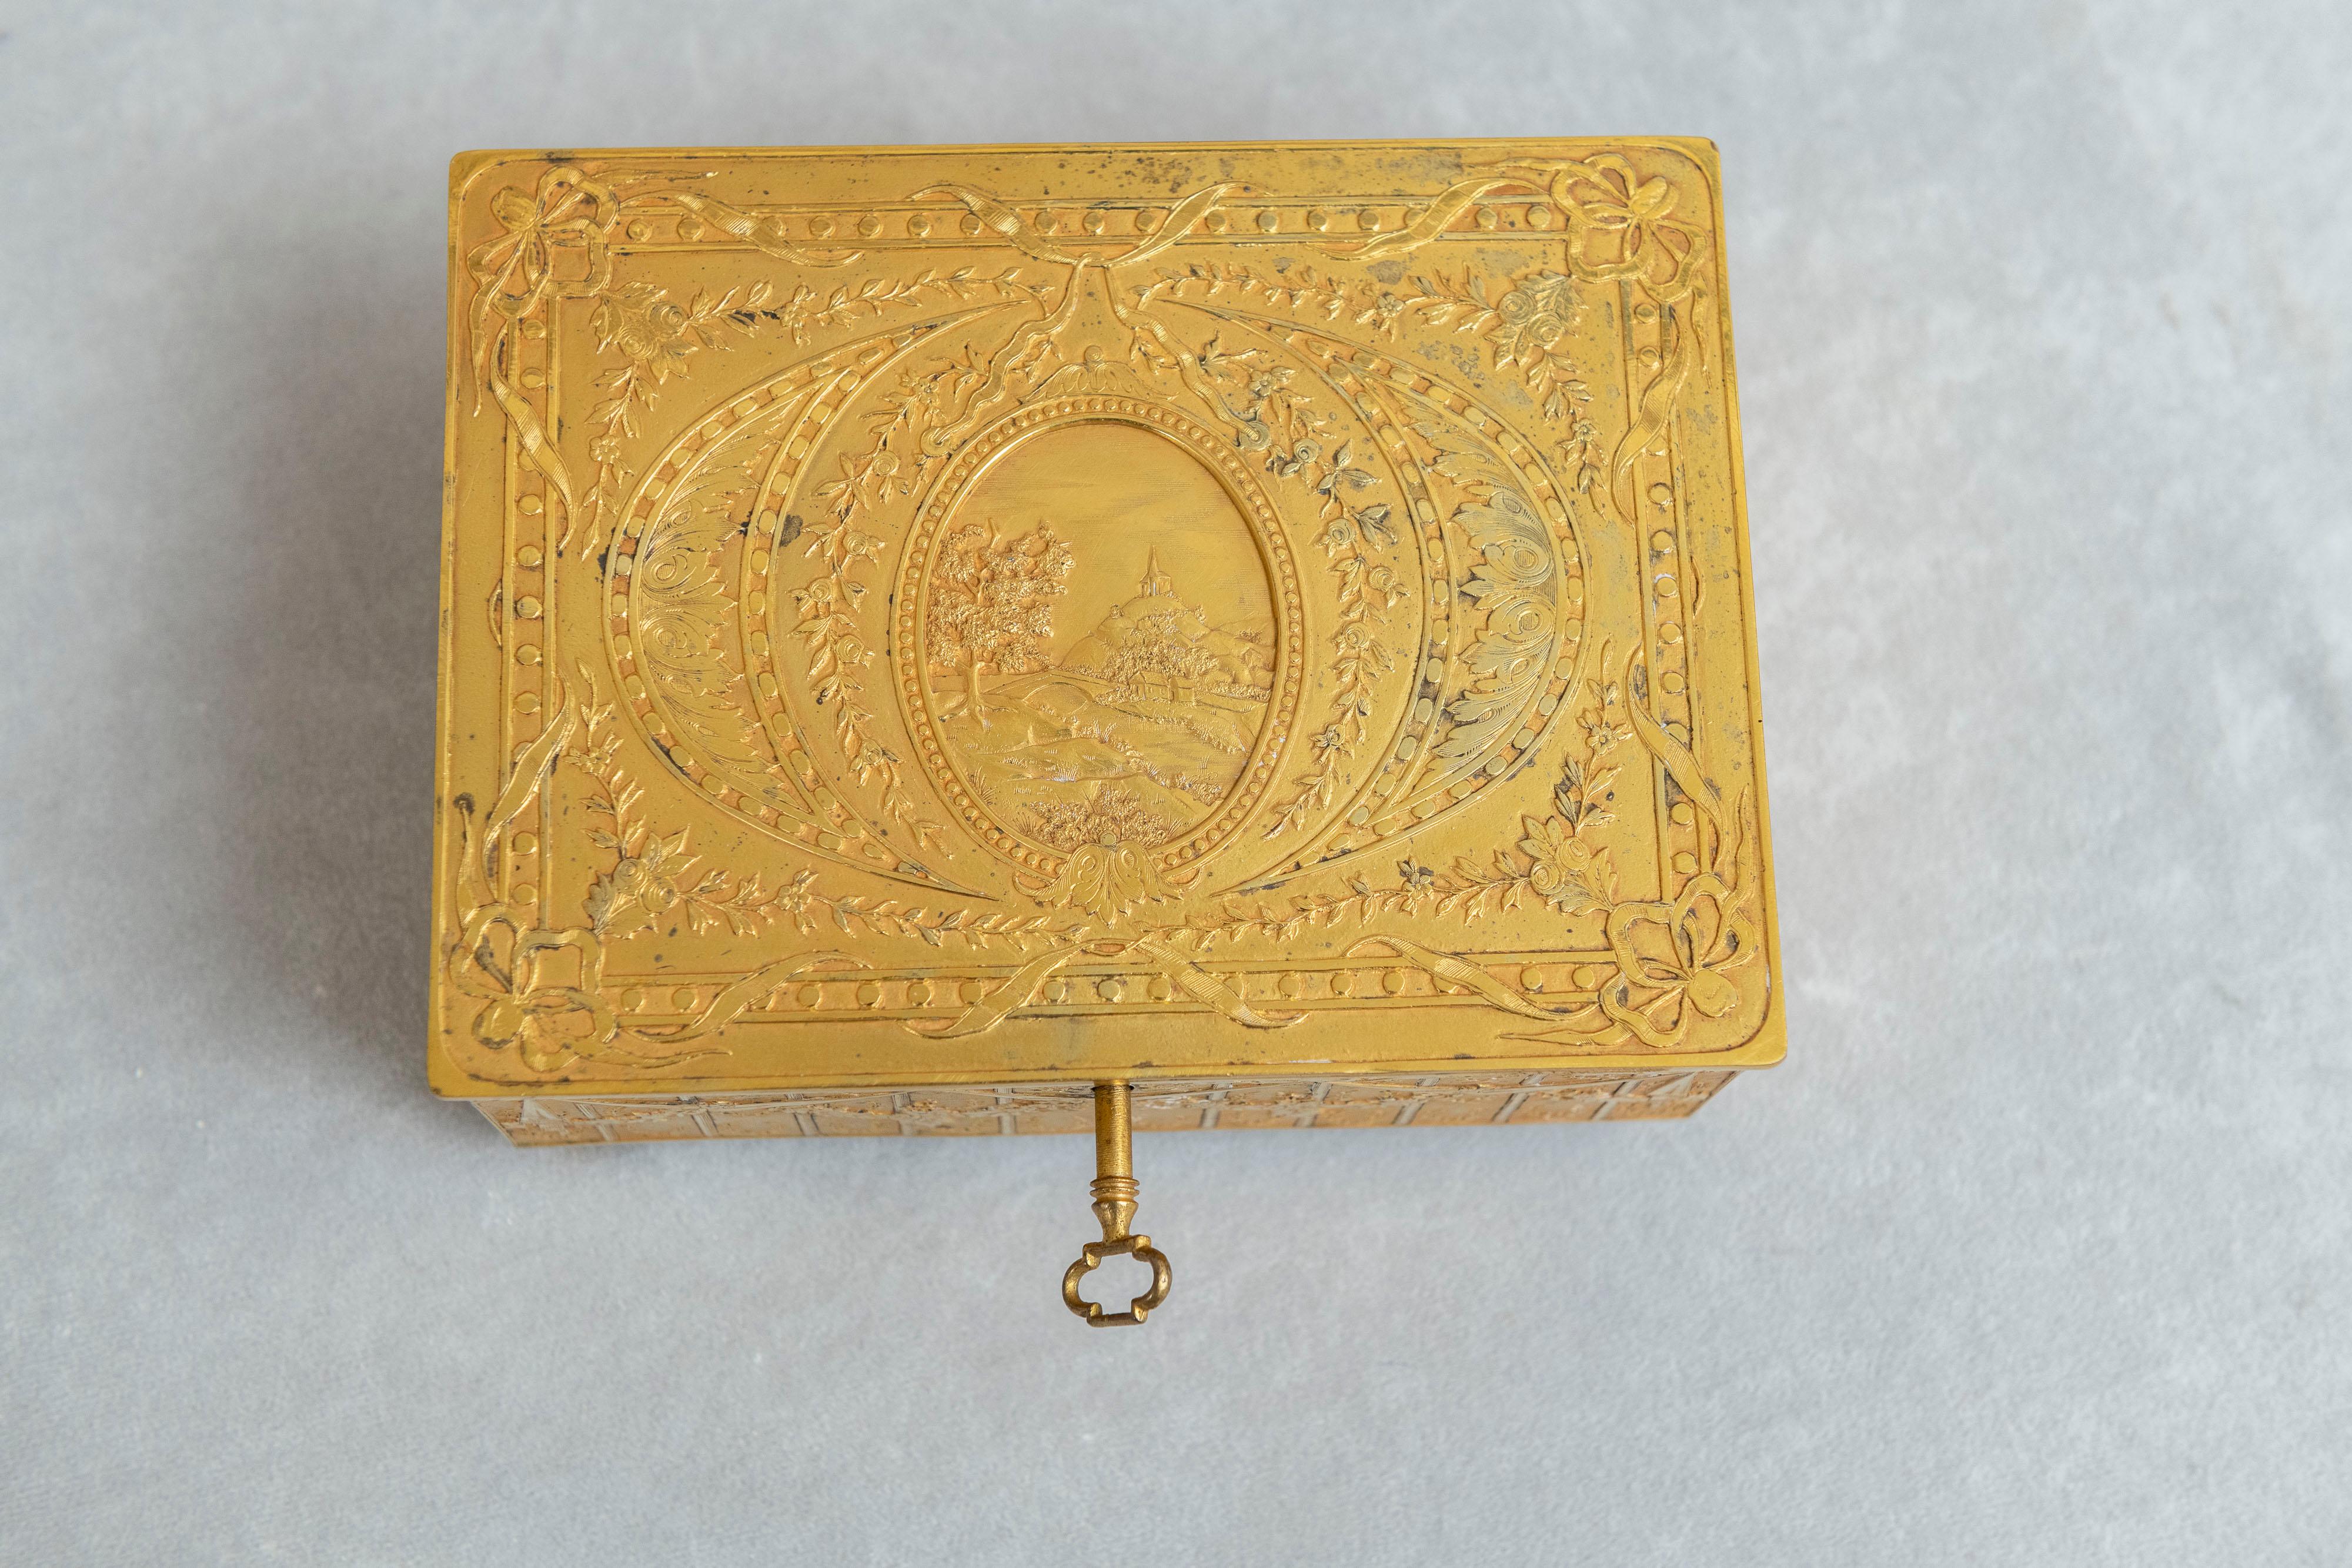 20th Century French Gilt Bronze Jewelry Box circa 1900 with Original Key Neoclassical Revival